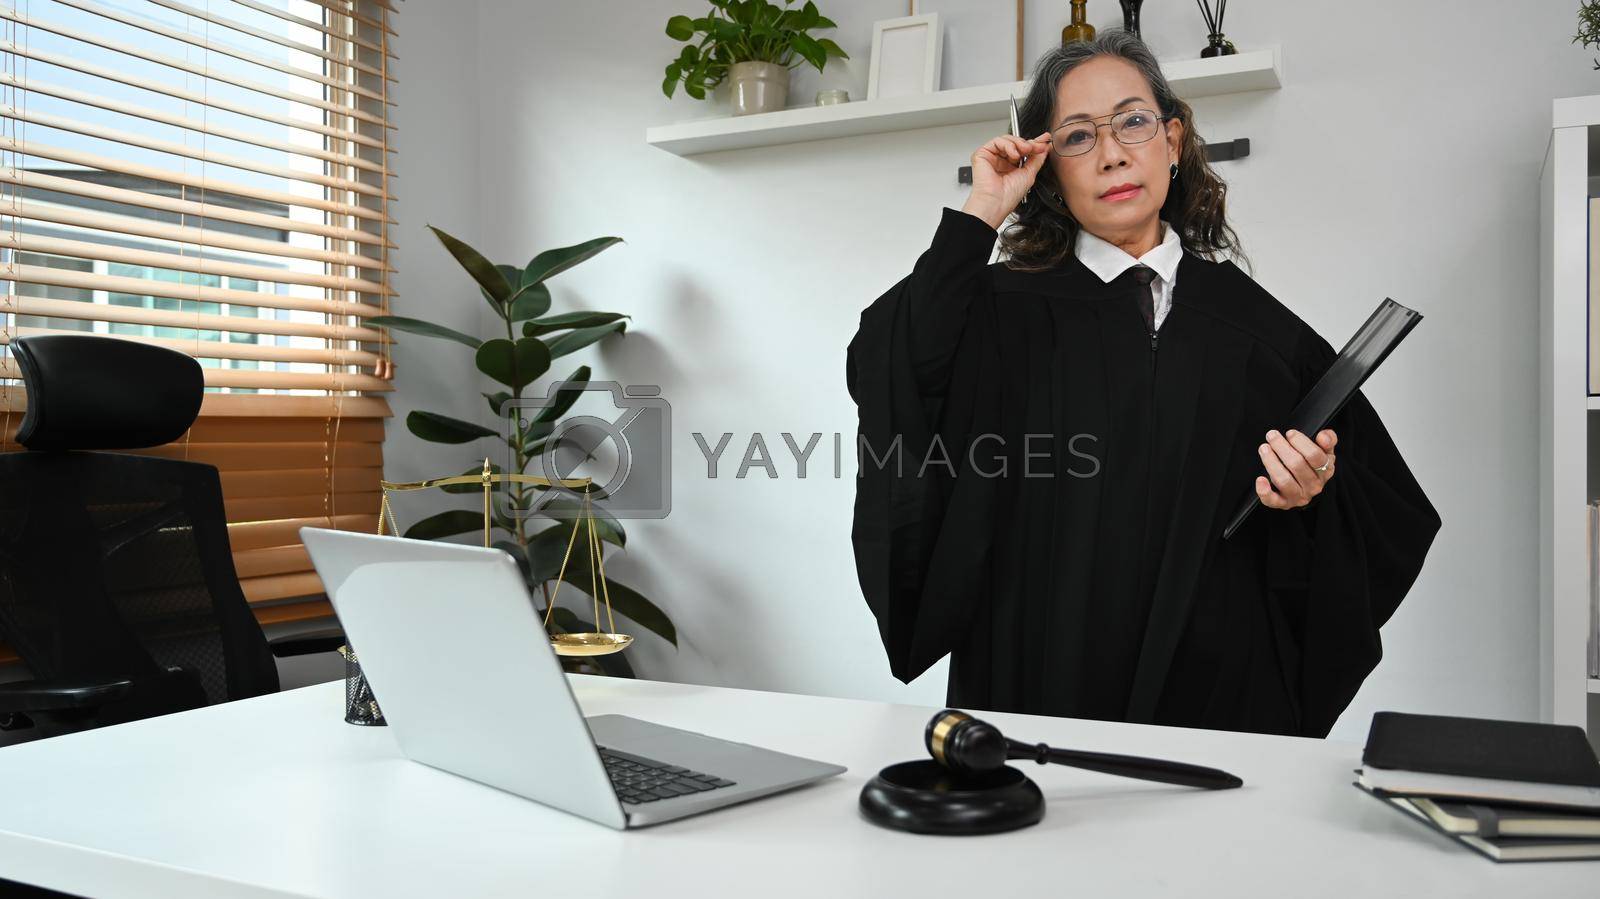 Royalty free image of Positive mature female judge, lawyer or attorney in robe gown uniform standing at her personal office. Law and justice concept by prathanchorruangsak